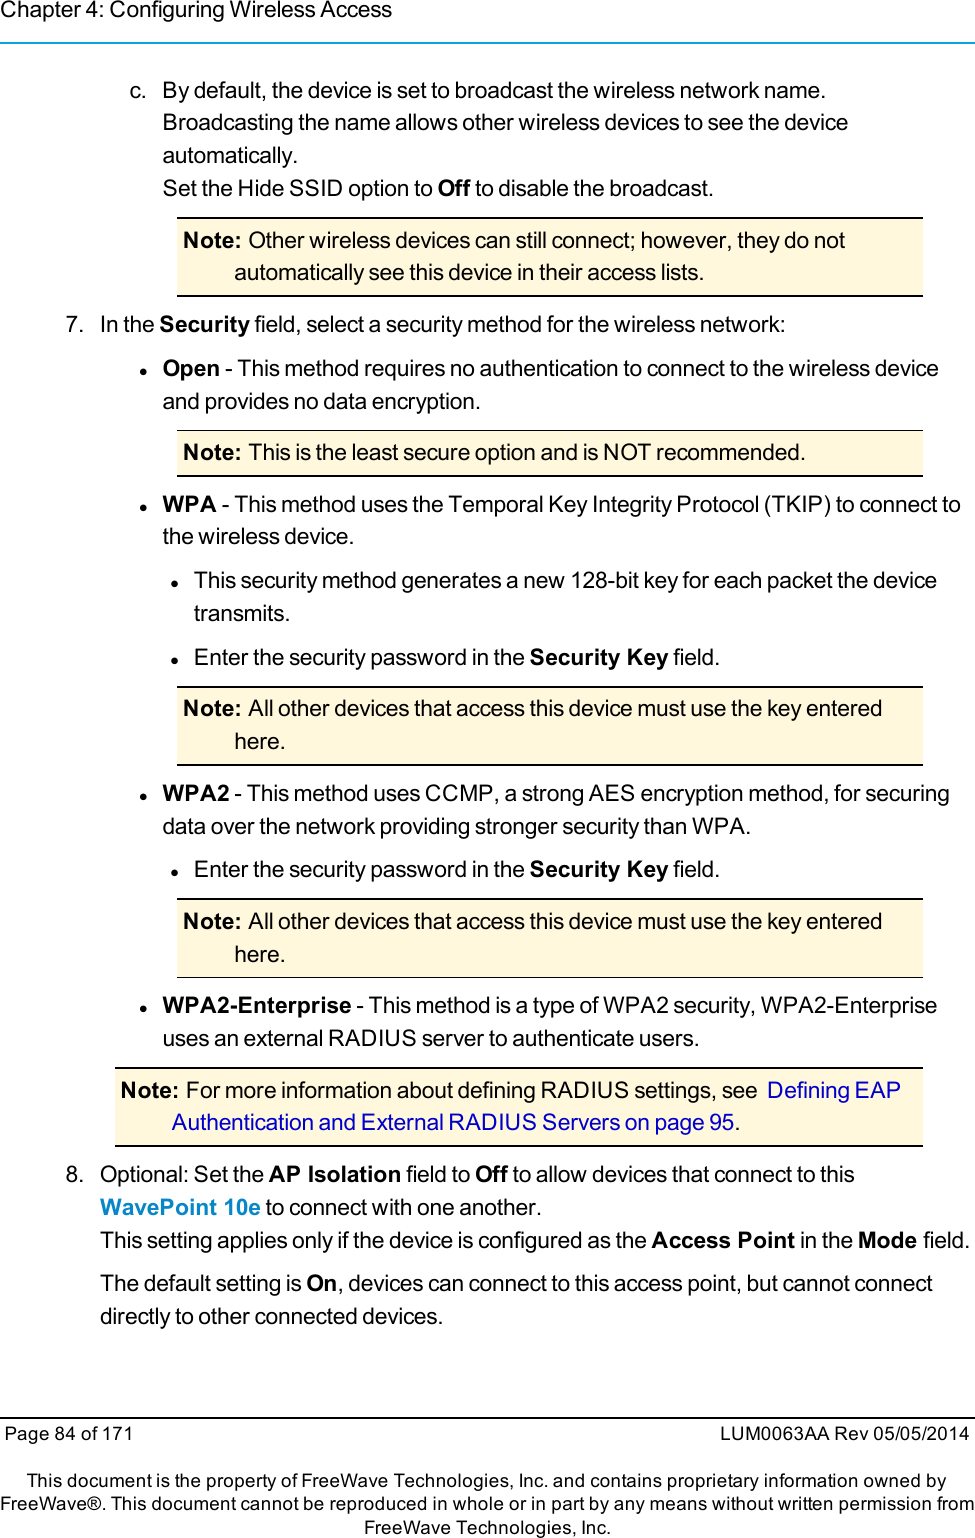 Chapter 4: Configuring Wireless Accessc. By default, the device is set to broadcast the wireless network name.Broadcasting the name allows other wireless devices to see the deviceautomatically.Set the Hide SSID option to Off to disable the broadcast.Note: Other wireless devices can still connect; however, they do notautomatically see this device in their access lists.7. In the Security field, select a security method for the wireless network:lOpen - This method requires no authentication to connect to the wireless deviceand provides no data encryption.Note: This is the least secure option and is NOT recommended.lWPA - This method uses the Temporal Key Integrity Protocol (TKIP) to connect tothe wireless device.lThis security method generates a new 128-bit key for each packet the devicetransmits.lEnter the security password in the Security Key field.Note: All other devices that access this device must use the key enteredhere.lWPA2 - This method uses CCMP, a strong AES encryption method, for securingdata over the network providing stronger security than WPA.lEnter the security password in the Security Key field.Note: All other devices that access this device must use the key enteredhere.lWPA2-Enterprise - This method is a type of WPA2 security, WPA2-Enterpriseuses an external RADIUS server to authenticate users.Note: For more information about defining RADIUS settings, see Defining EAPAuthentication and External RADIUS Servers on page 95.8. Optional: Set the AP Isolation field to Off to allow devices that connect to thisWavePoint 10e to connect with one another.This setting applies only if the device is configured as the Access Point in the Mode field.The default setting is On, devices can connect to this access point, but cannot connectdirectly to other connected devices.Page 84 of 171 LUM0063AA Rev 05/05/2014This document is the property of FreeWave Technologies, Inc. and contains proprietary information owned byFreeWave®. This document cannot be reproduced in whole or in part by any means without written permission fromFreeWave Technologies, Inc.